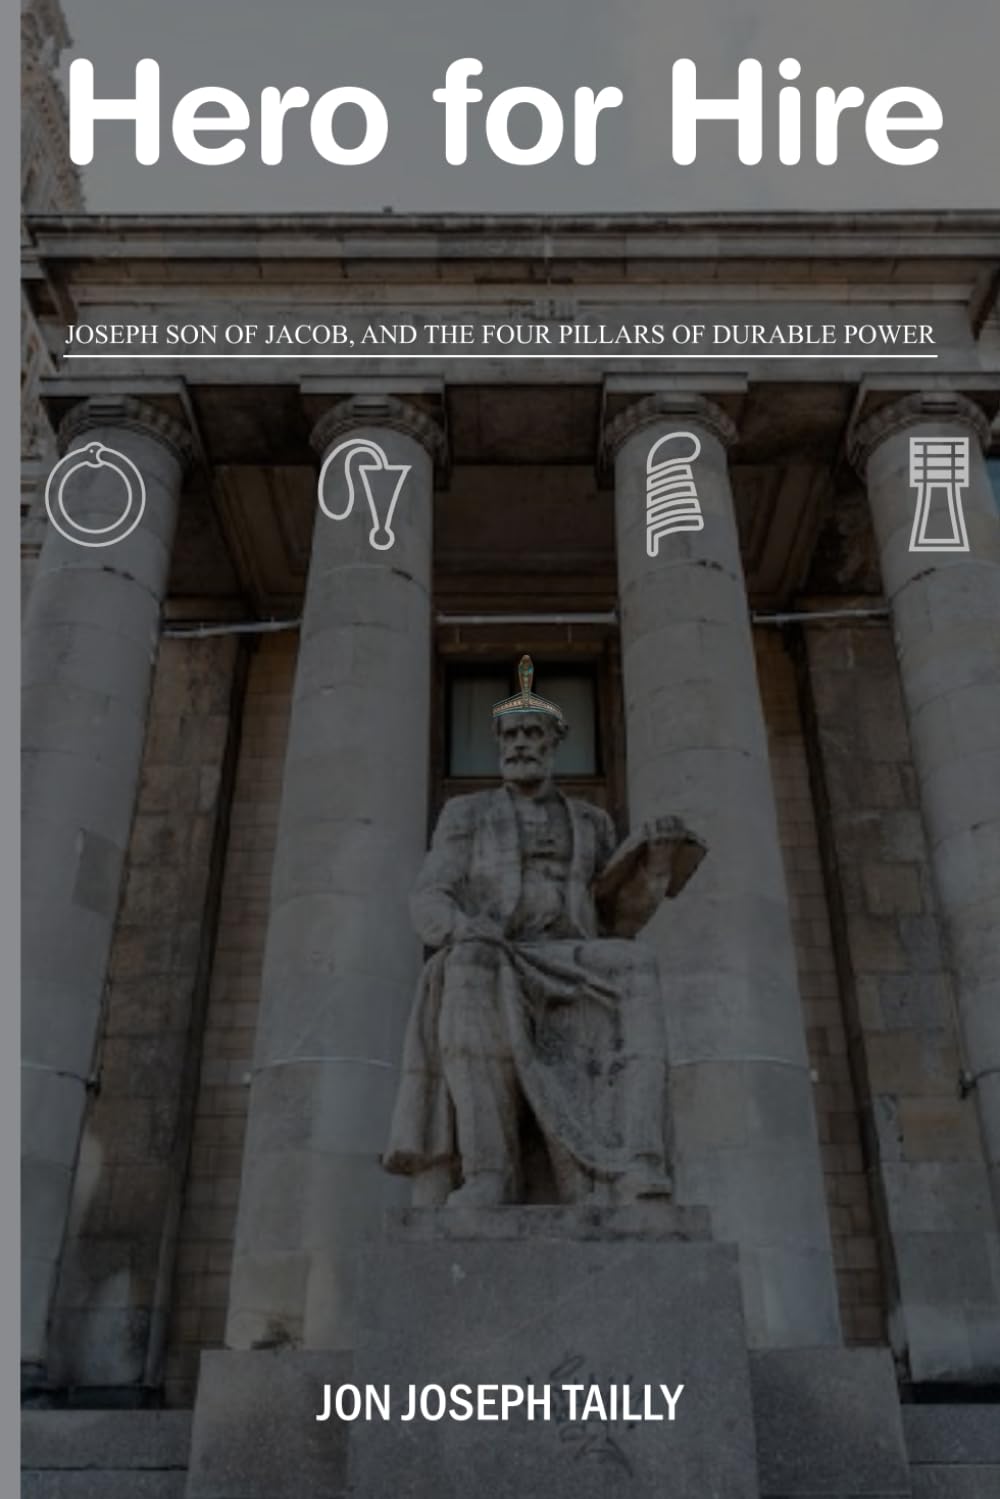 Unlock the Four Pillars of Durable Power With Jon Joseph Tailly’s New Book, "Hero for Hire: Joseph Son of Jacob and the Four Pillars of Durable Power"